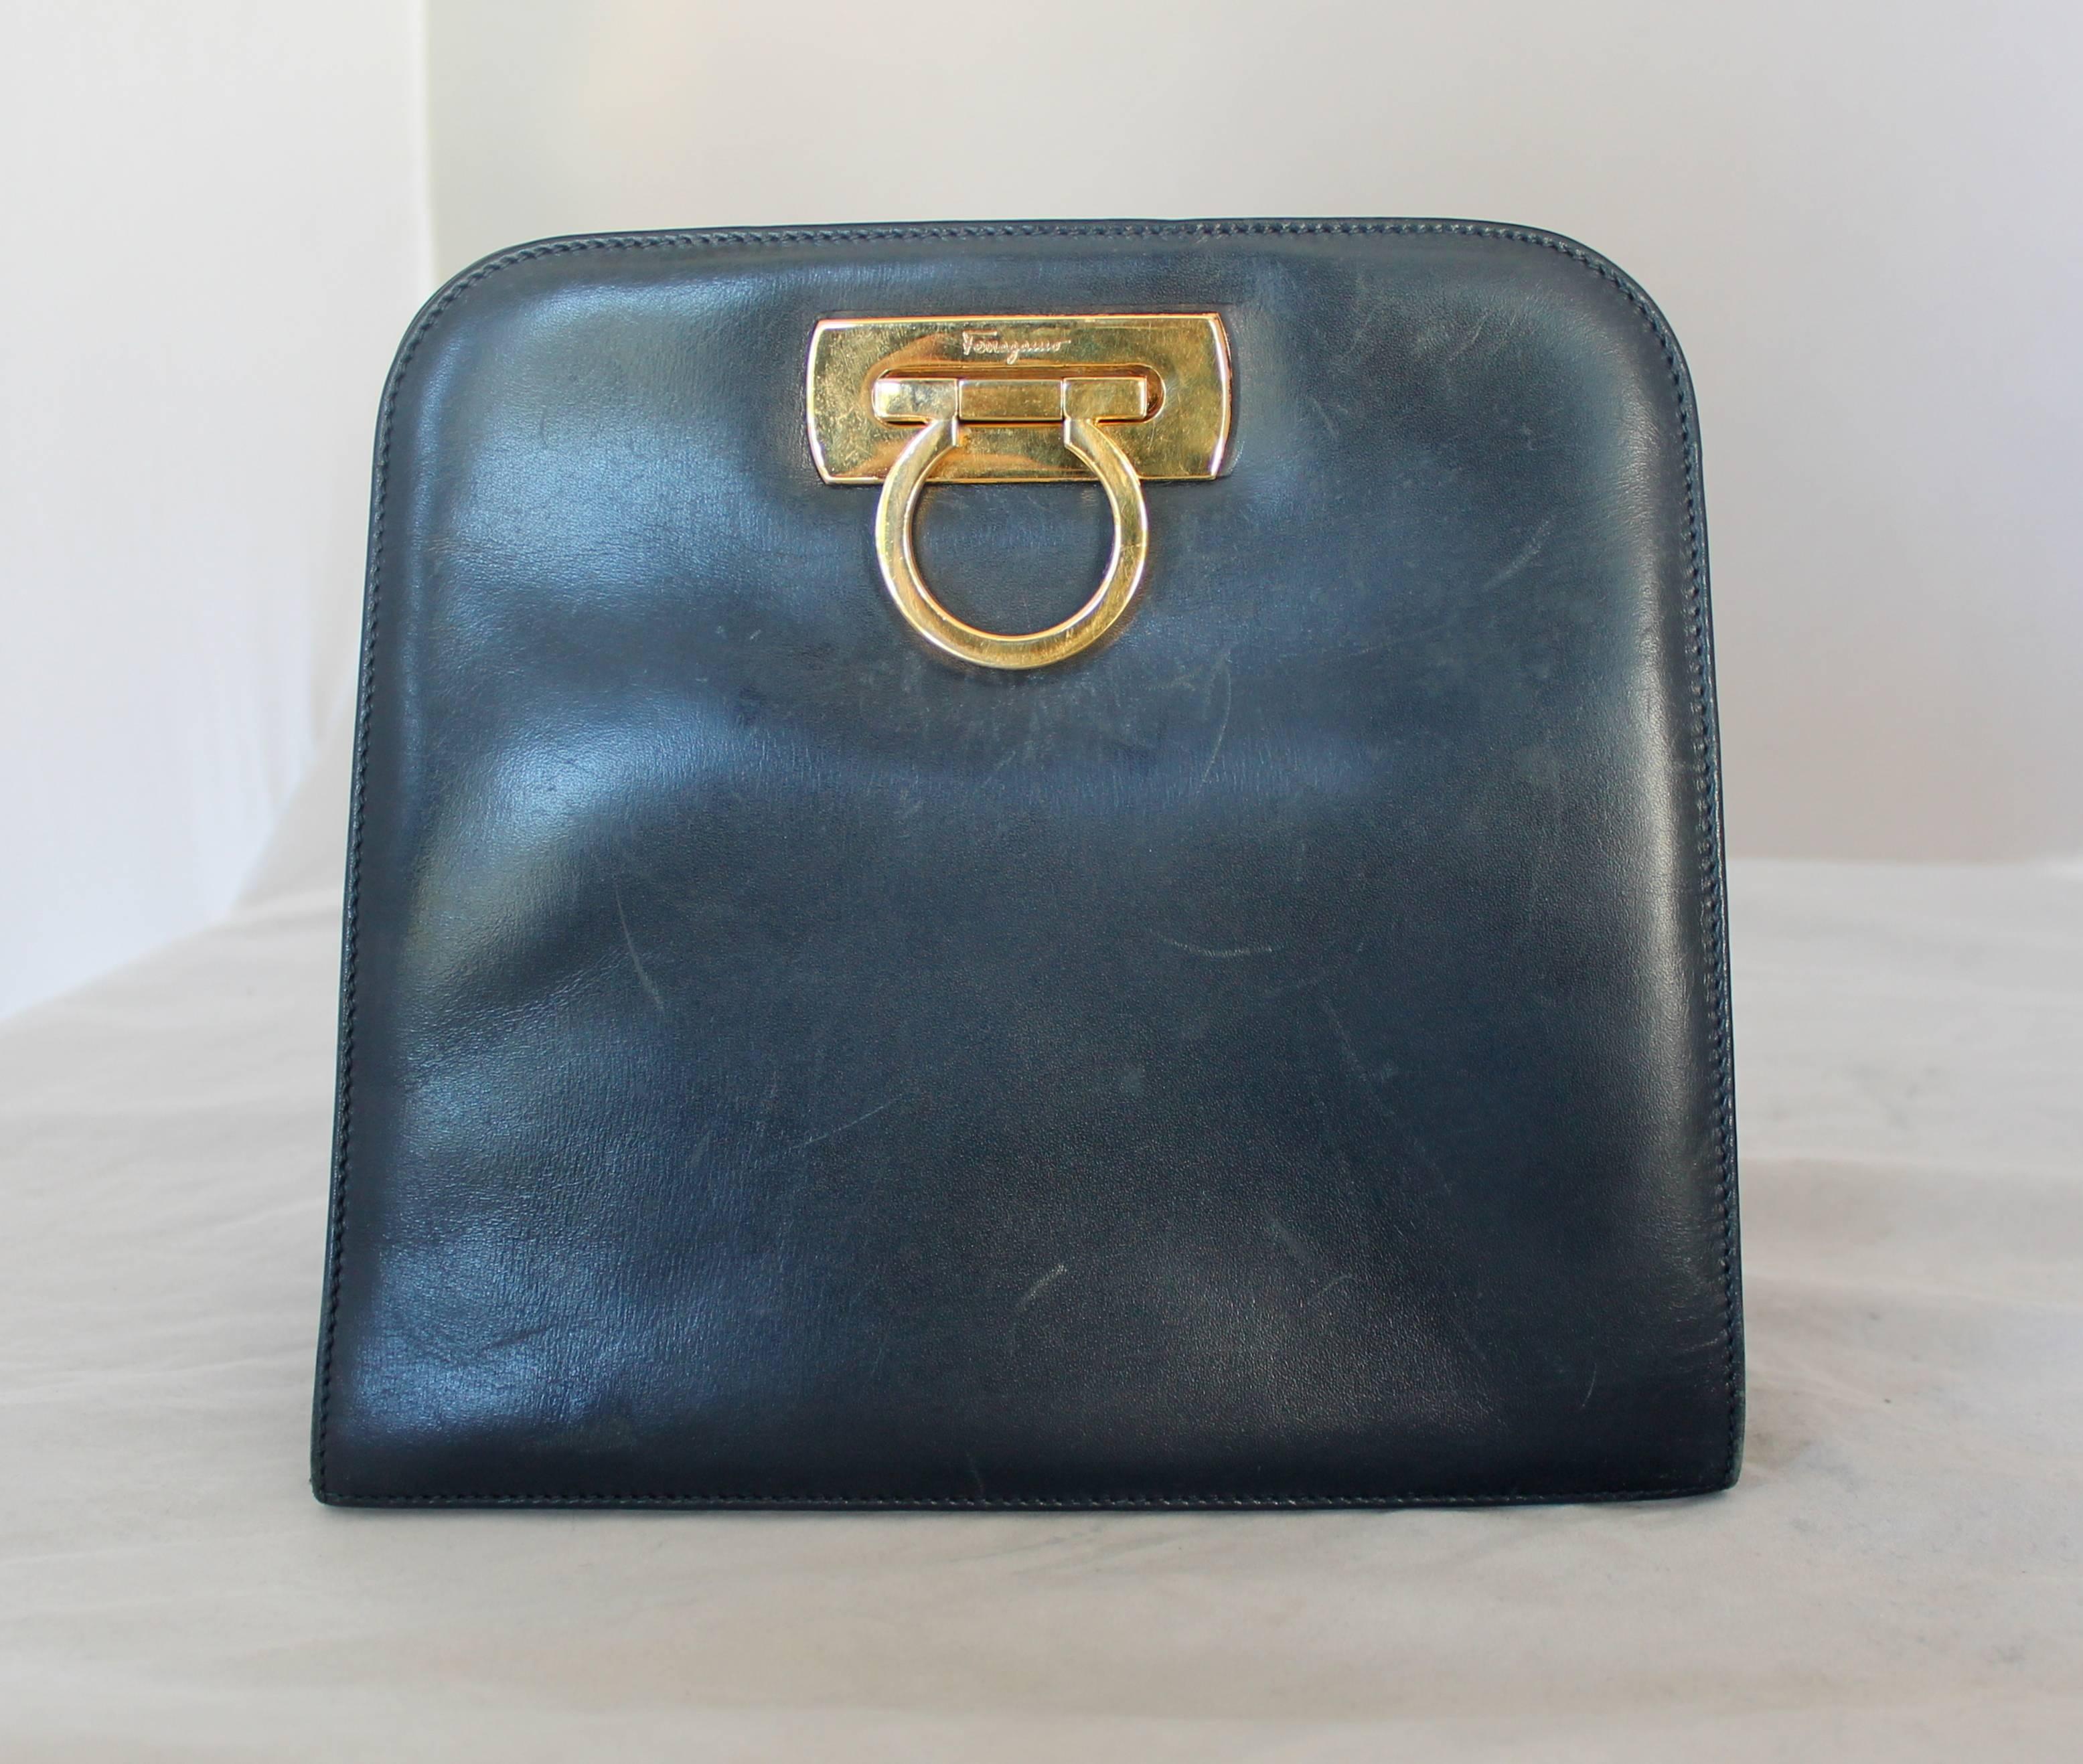 Salvatore Ferragamo Vintage Navy Leather Square Clutch/Crossbody Bag - GHW - Circa 80's

This bag is in fair condition with marks on the front, bottom, and back of bag. This bag is square shaped and has gold hardware with a gold chain. This bag